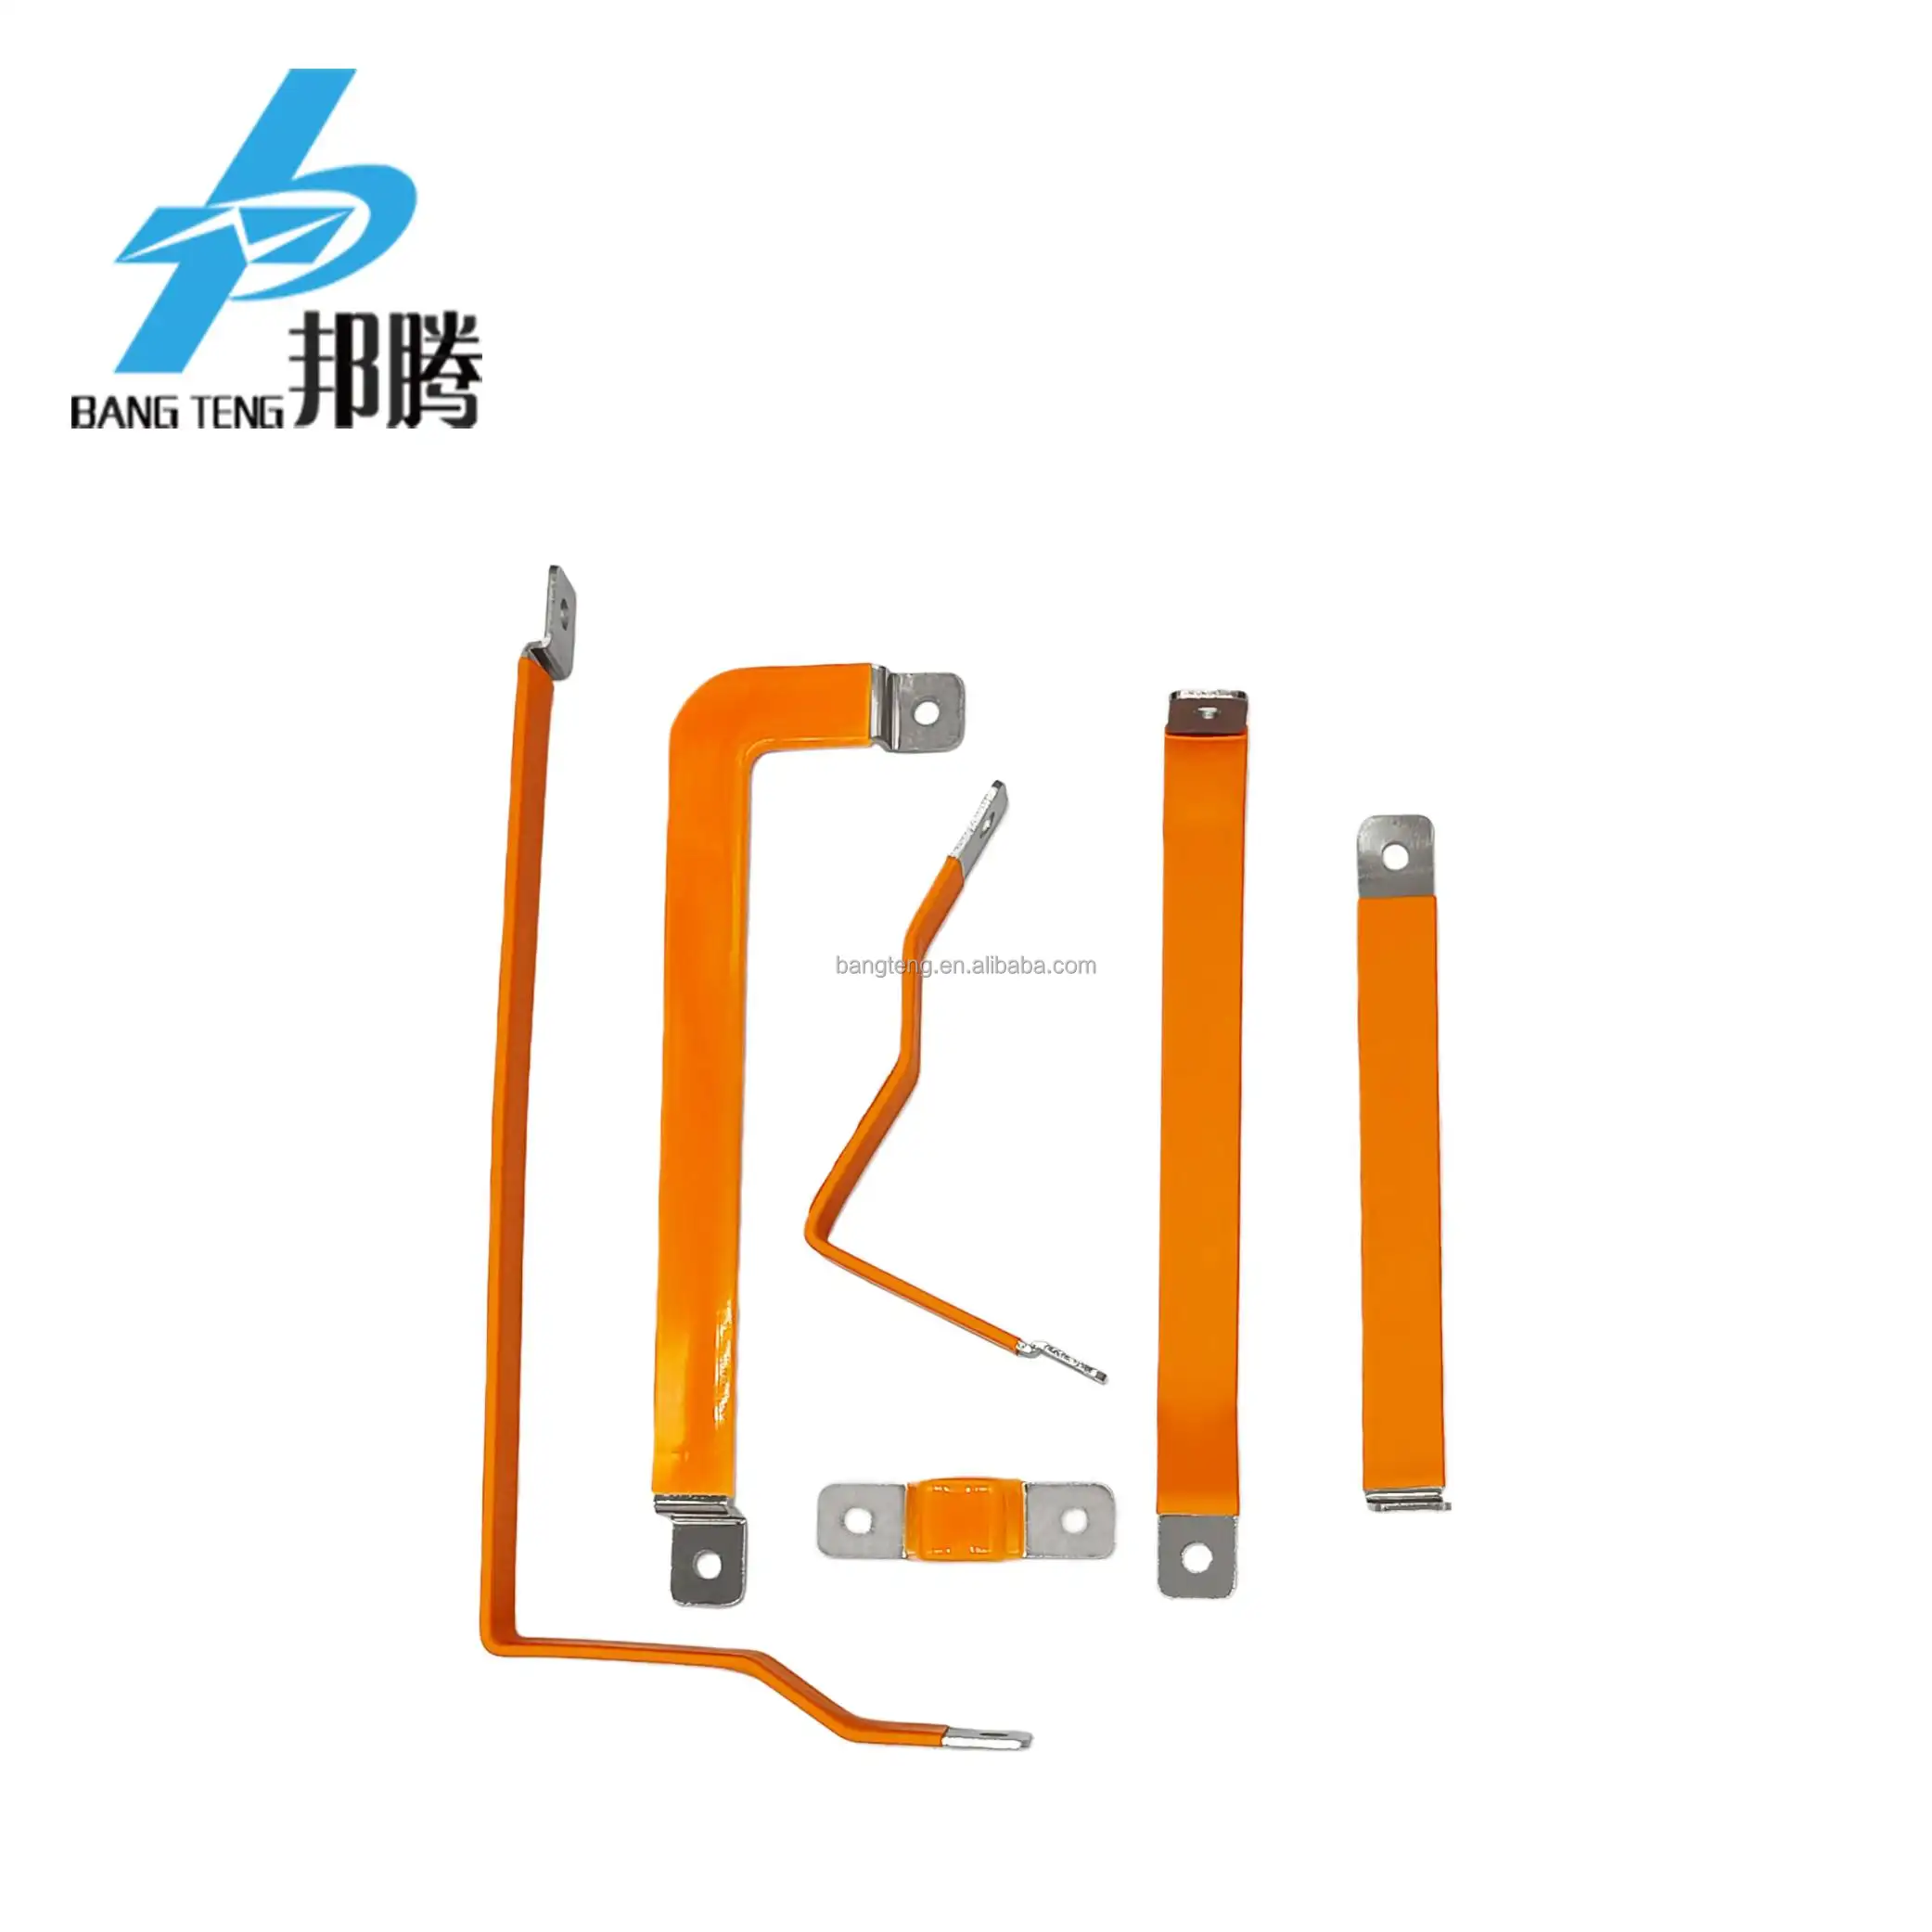 High current battery busbar insulated copper busbar flexible Copper busbar flexible connector with heat shrink tube